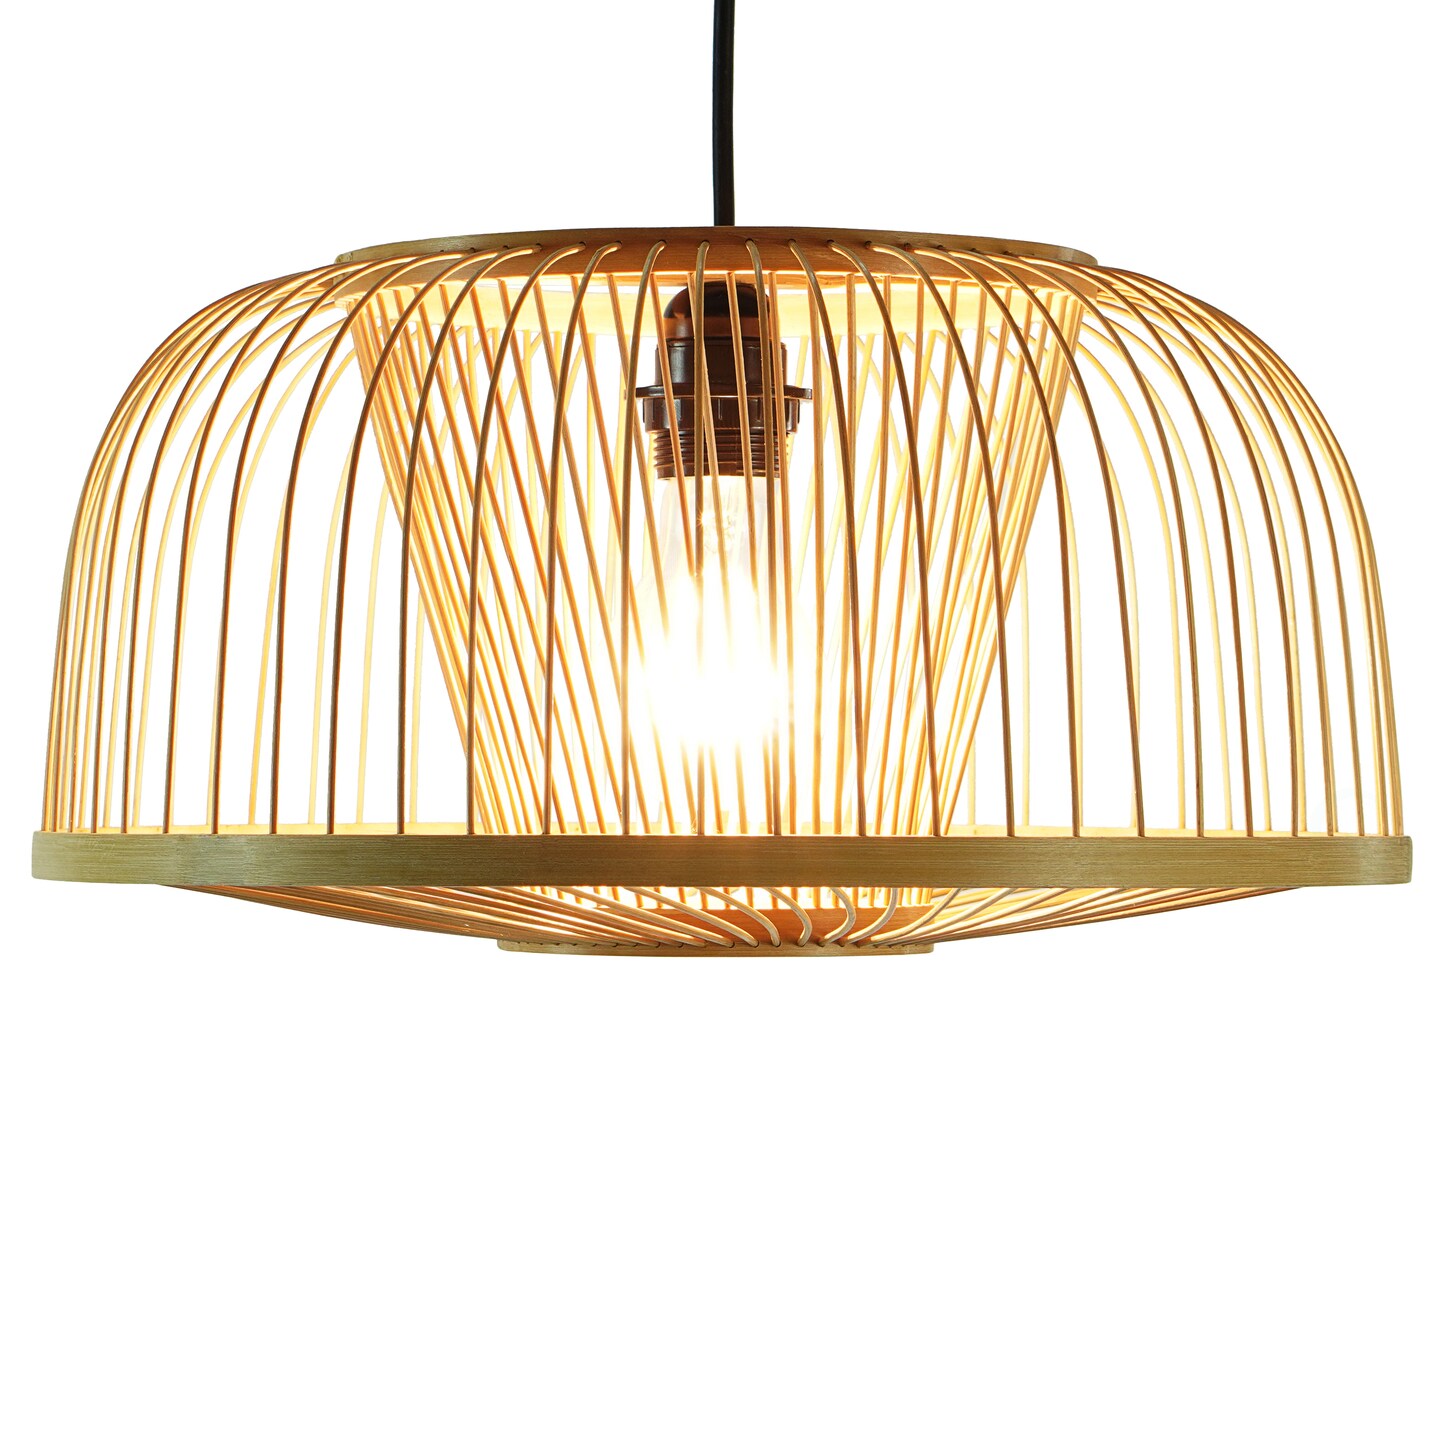 Modern Oval Bamboo Wicker Rattan Hanging Light Shade for Living Room, Dining Room, Entryway